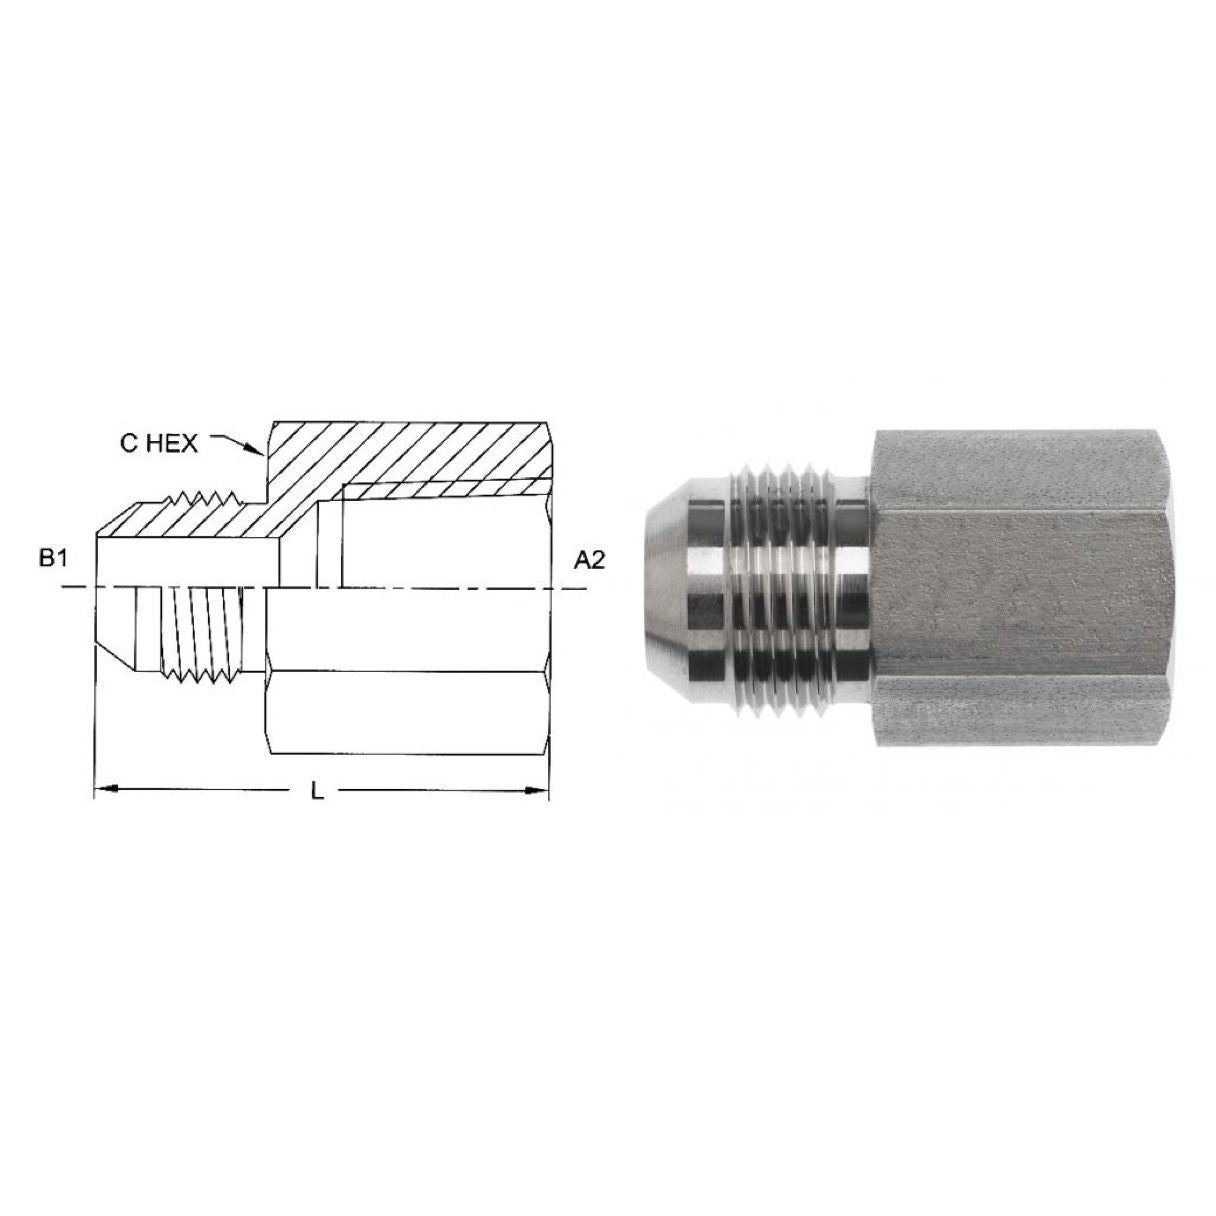 2405-10-16 : OneHydraulics Adapter, Straight, 0.625 (5/8") Male NPT x 1" Female, Steel, 3000psi